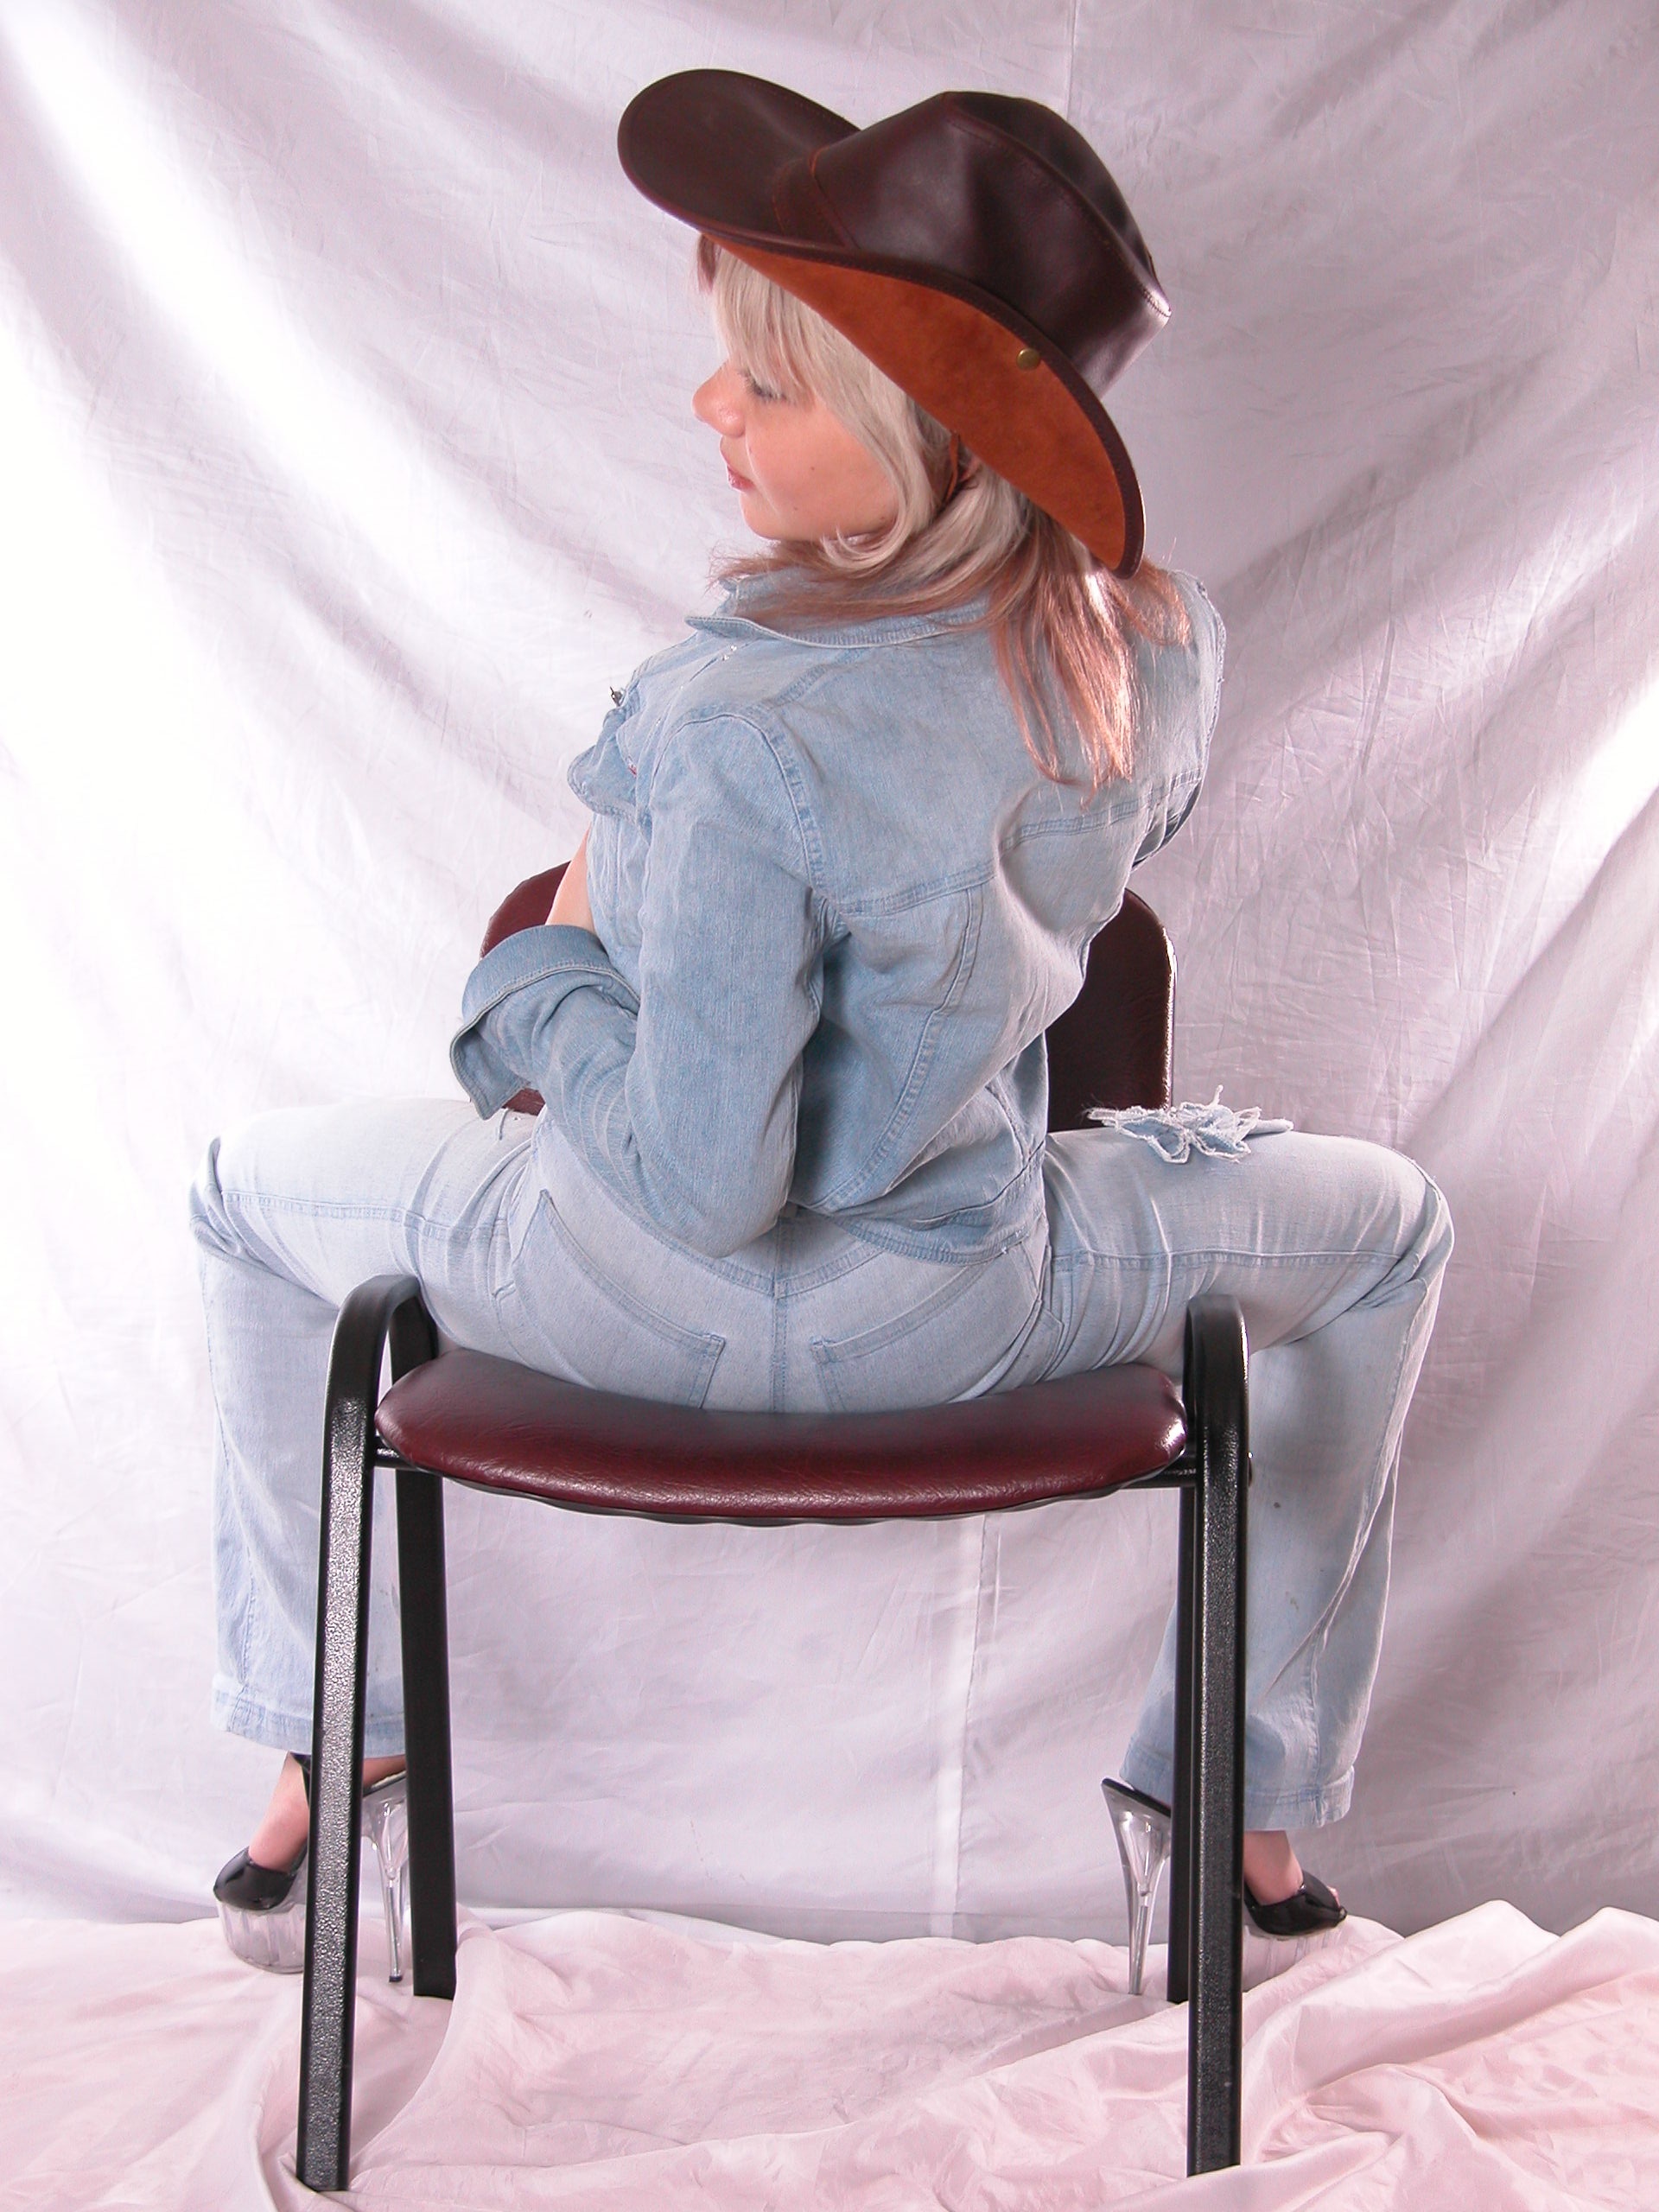 Girl in hat poses on the chair